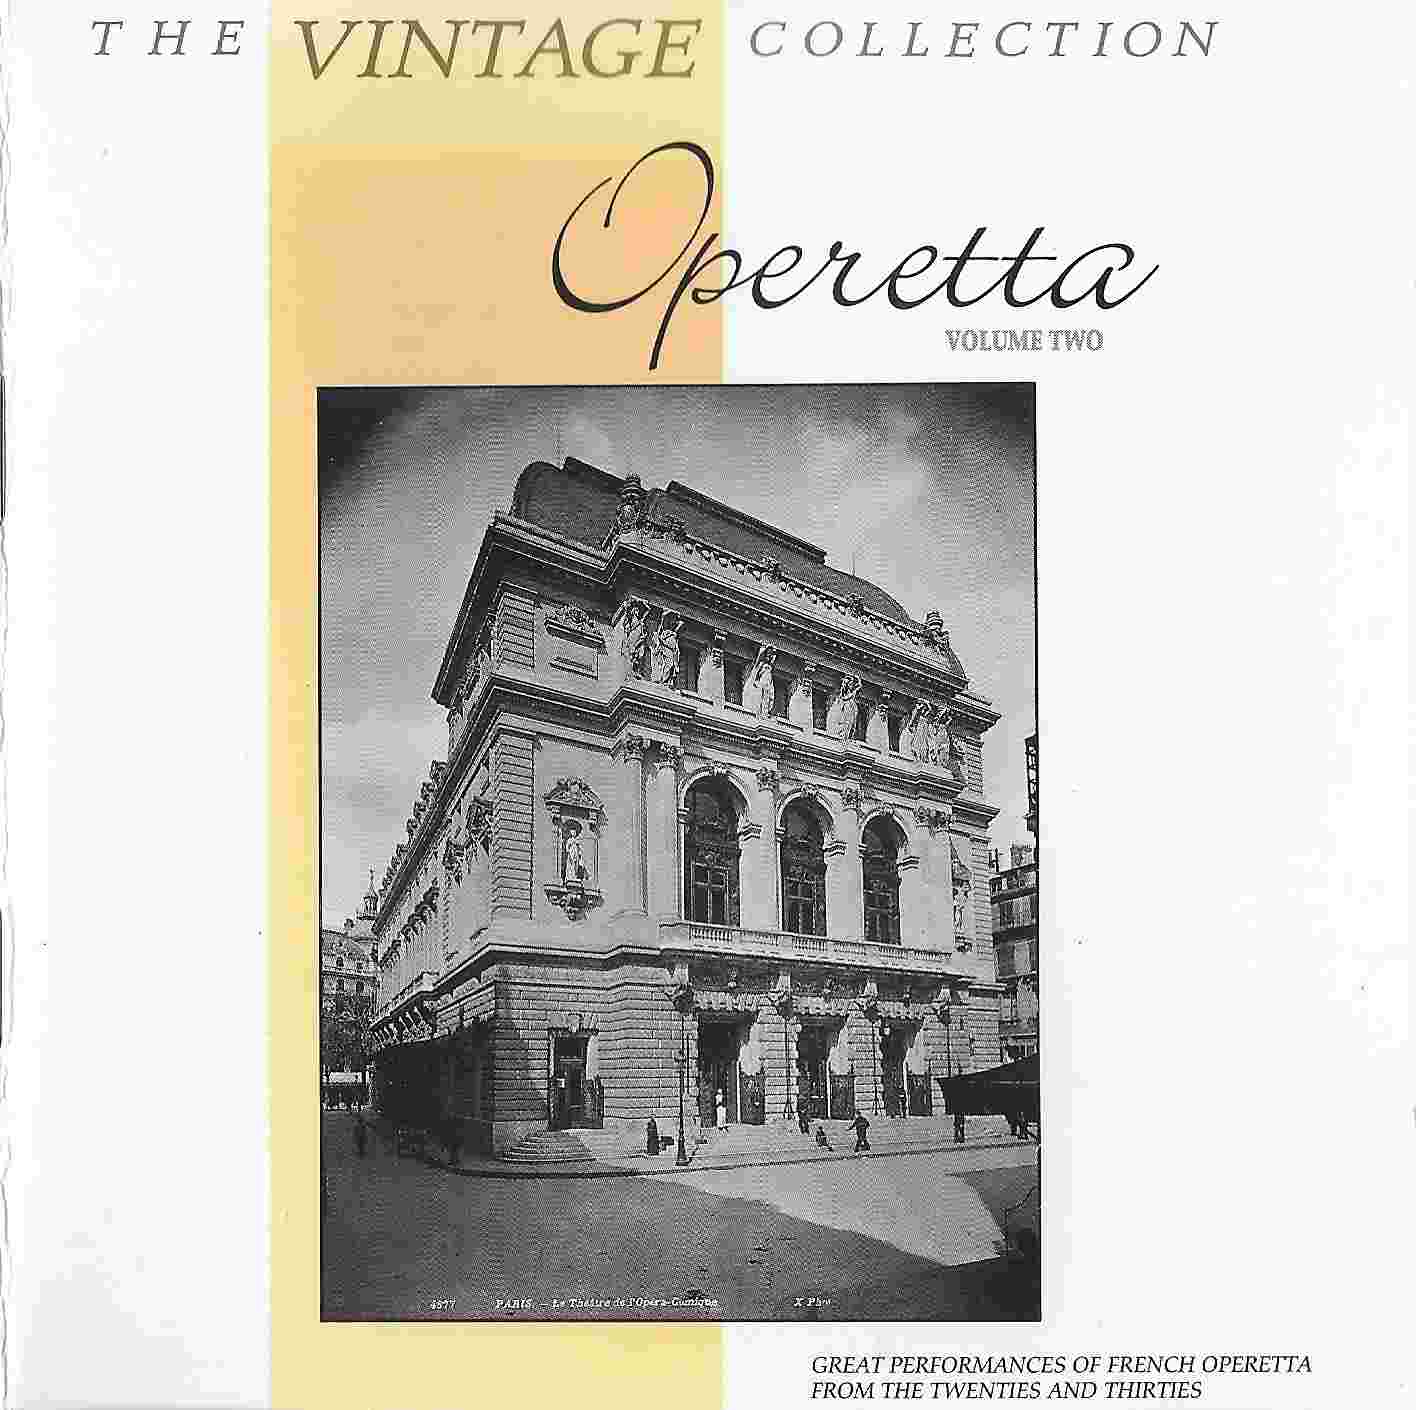 Picture of BBCCD755 The vintage collection - Operetta volume 2 by artist Various from the BBC cds - Records and Tapes library